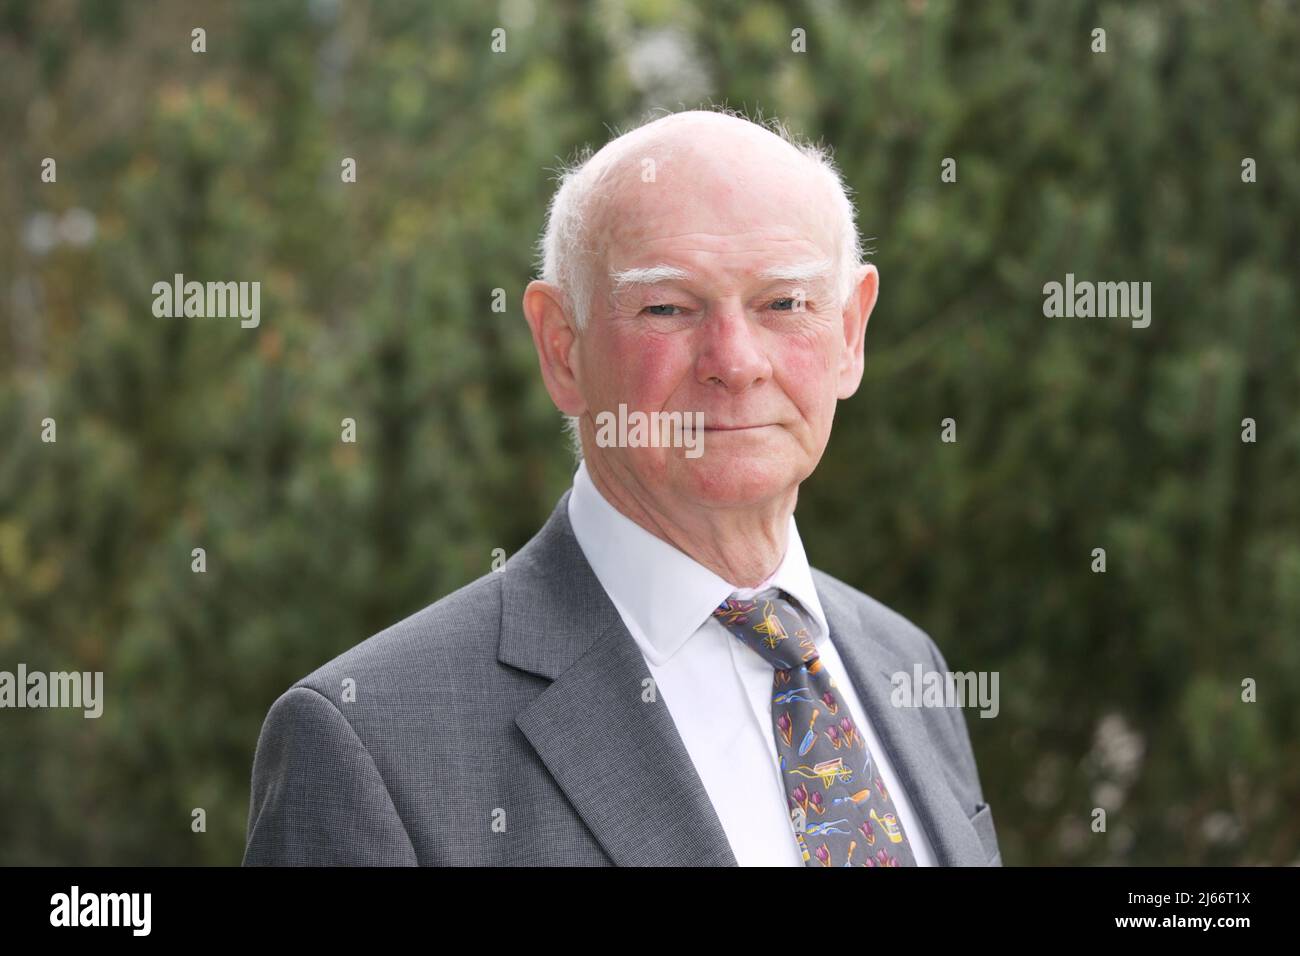 Edinburgh, UK, 28th April 2022: Howard Davies, chairman of NatWest Group, attending the AGM of the company at its Gogarburn headquarters. Pic: TERRY MURDEN / Alamy Stock Photo